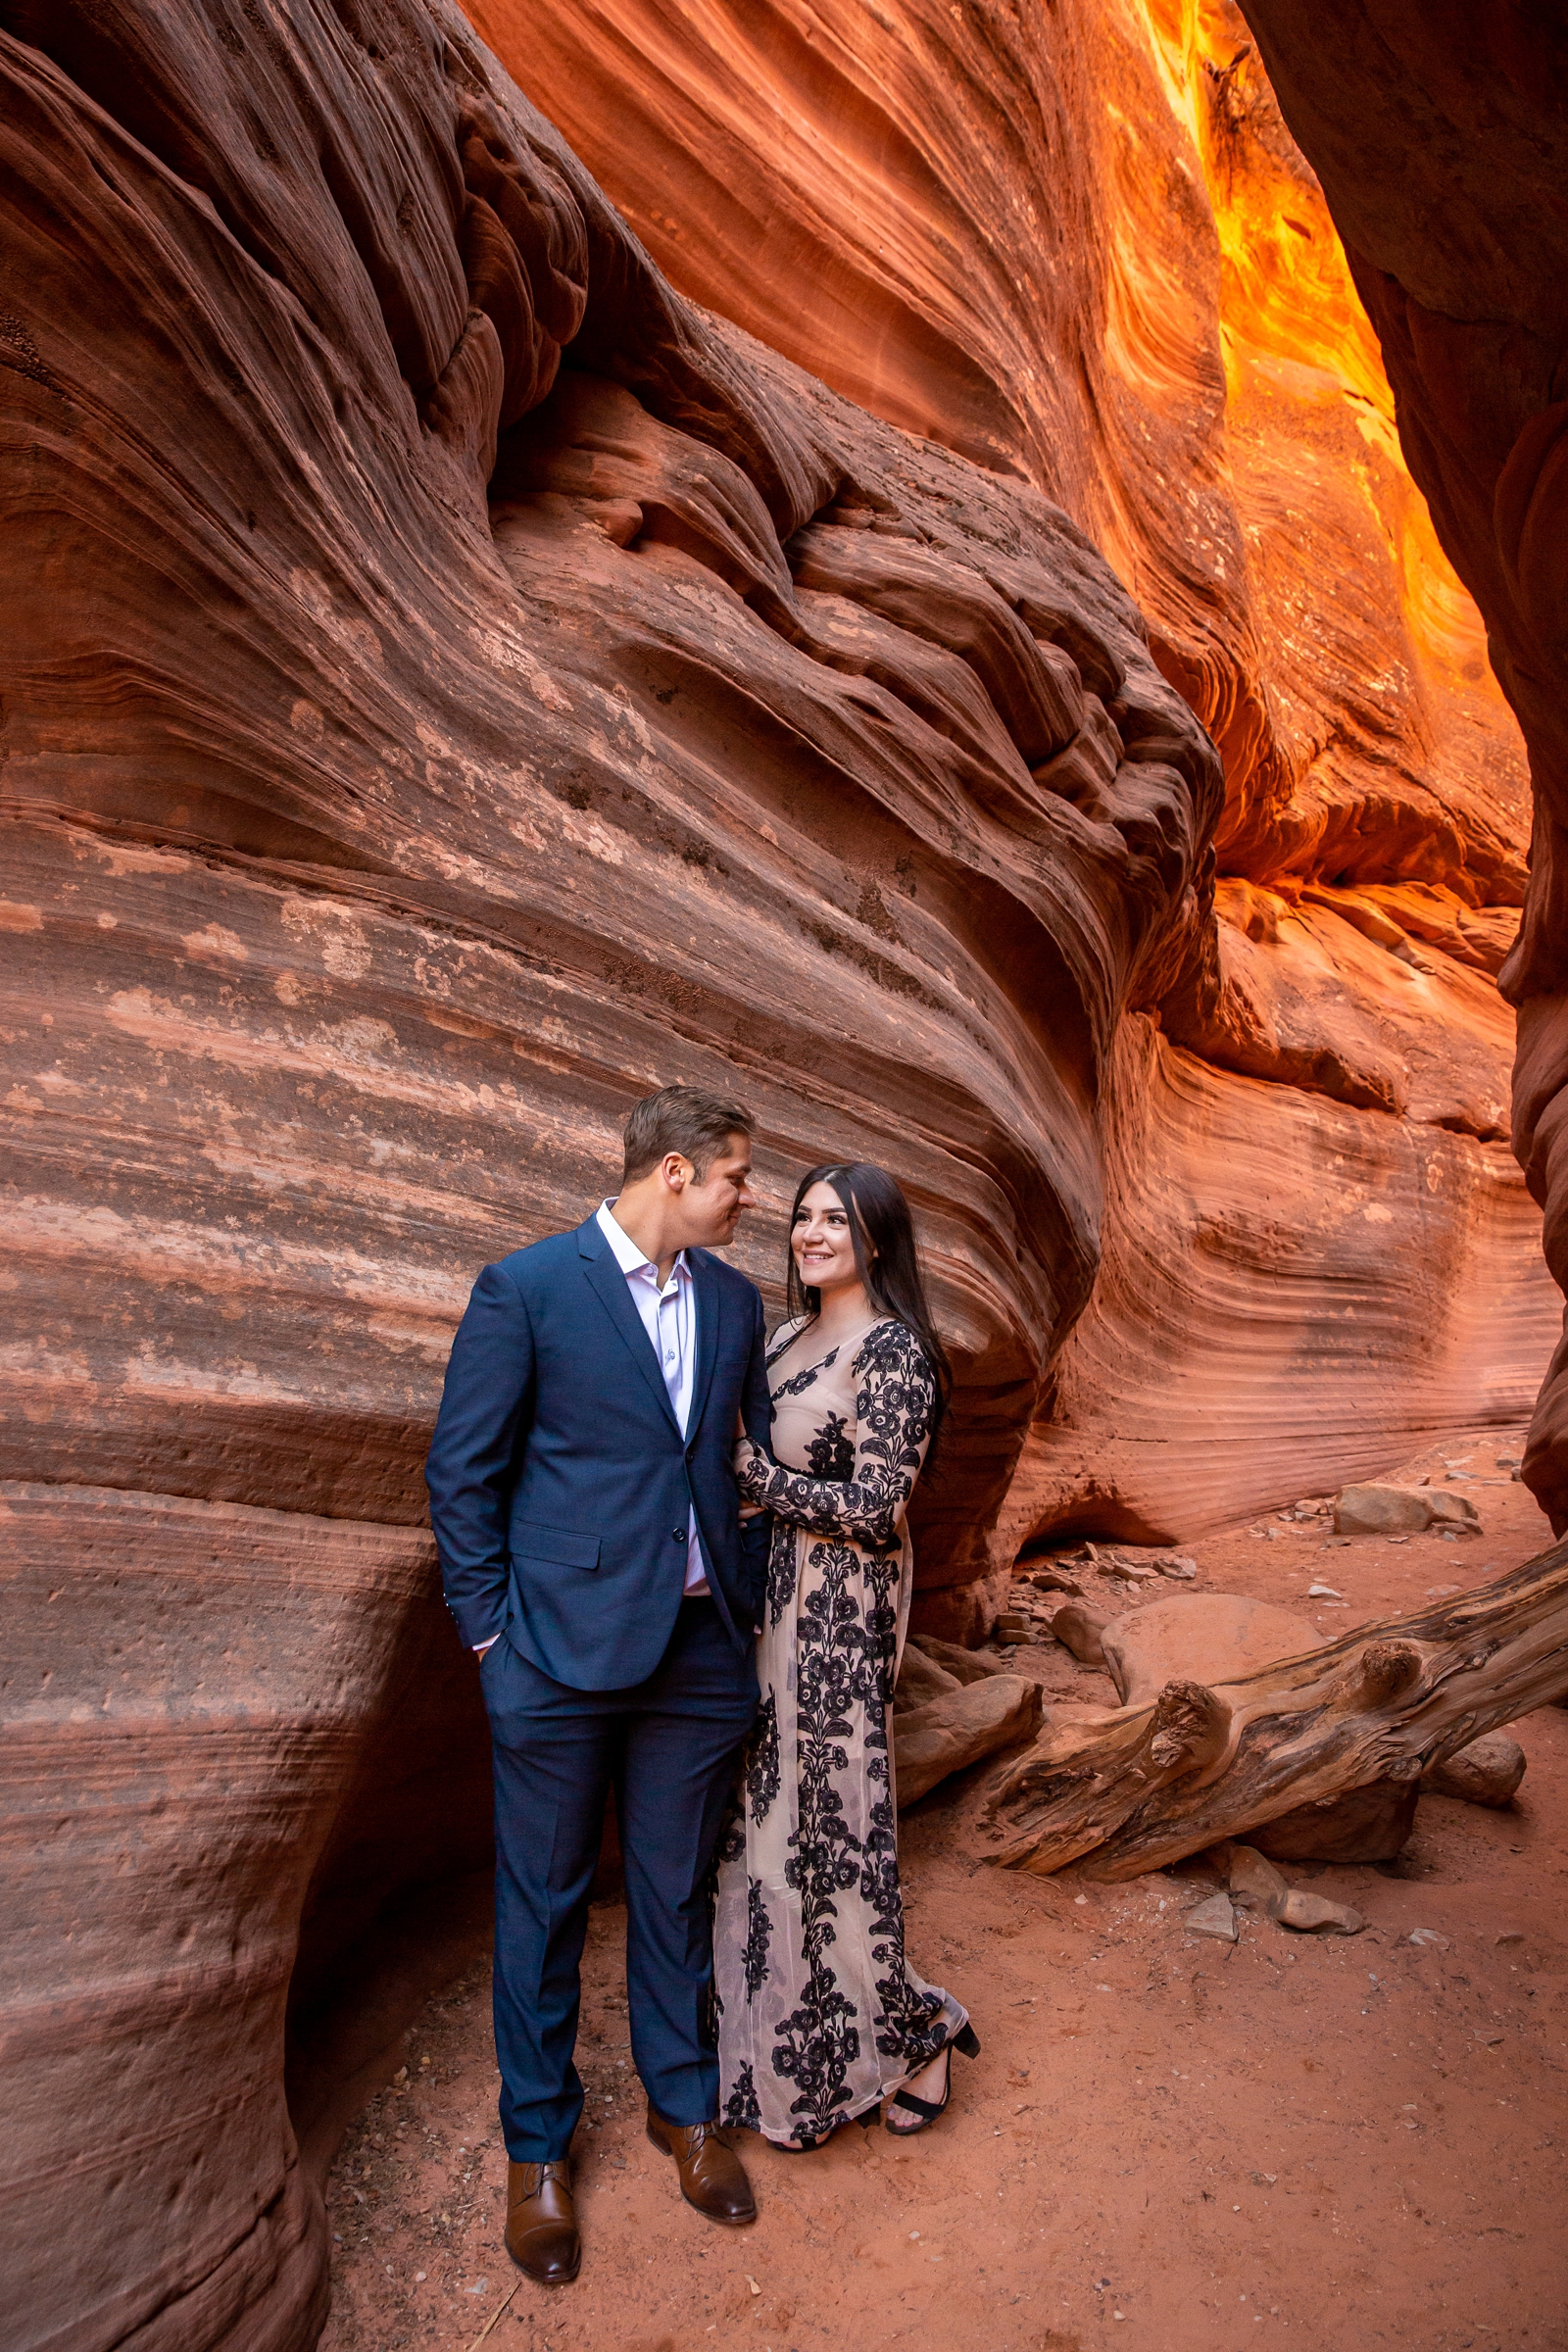 Engaged couple lovingly staring into each other's eyes in a slot canyon.